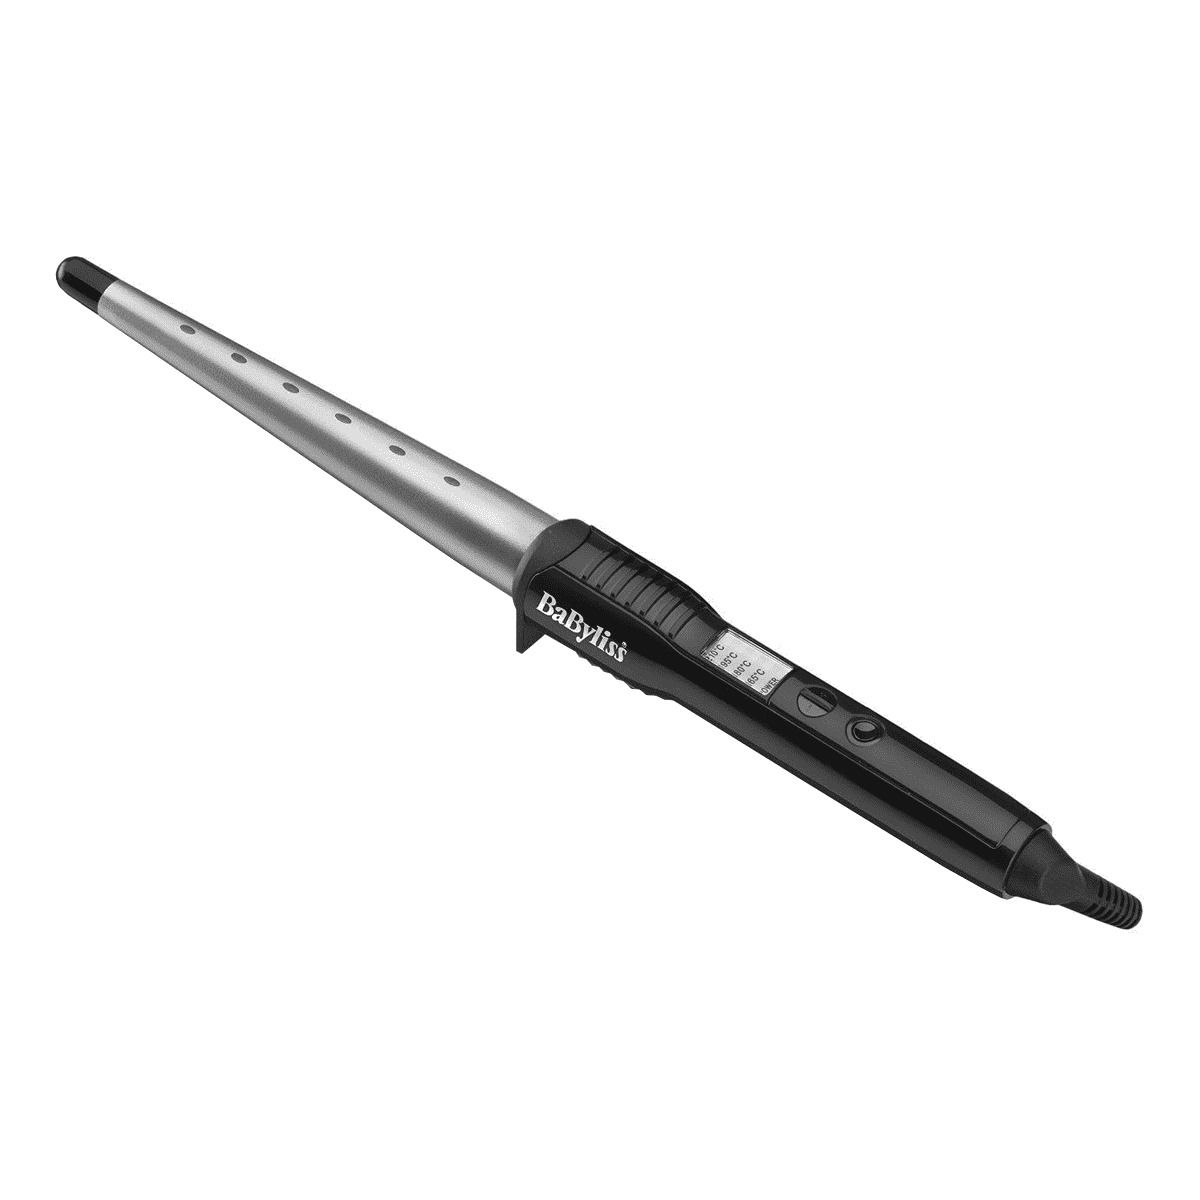 Curling Wand Pro